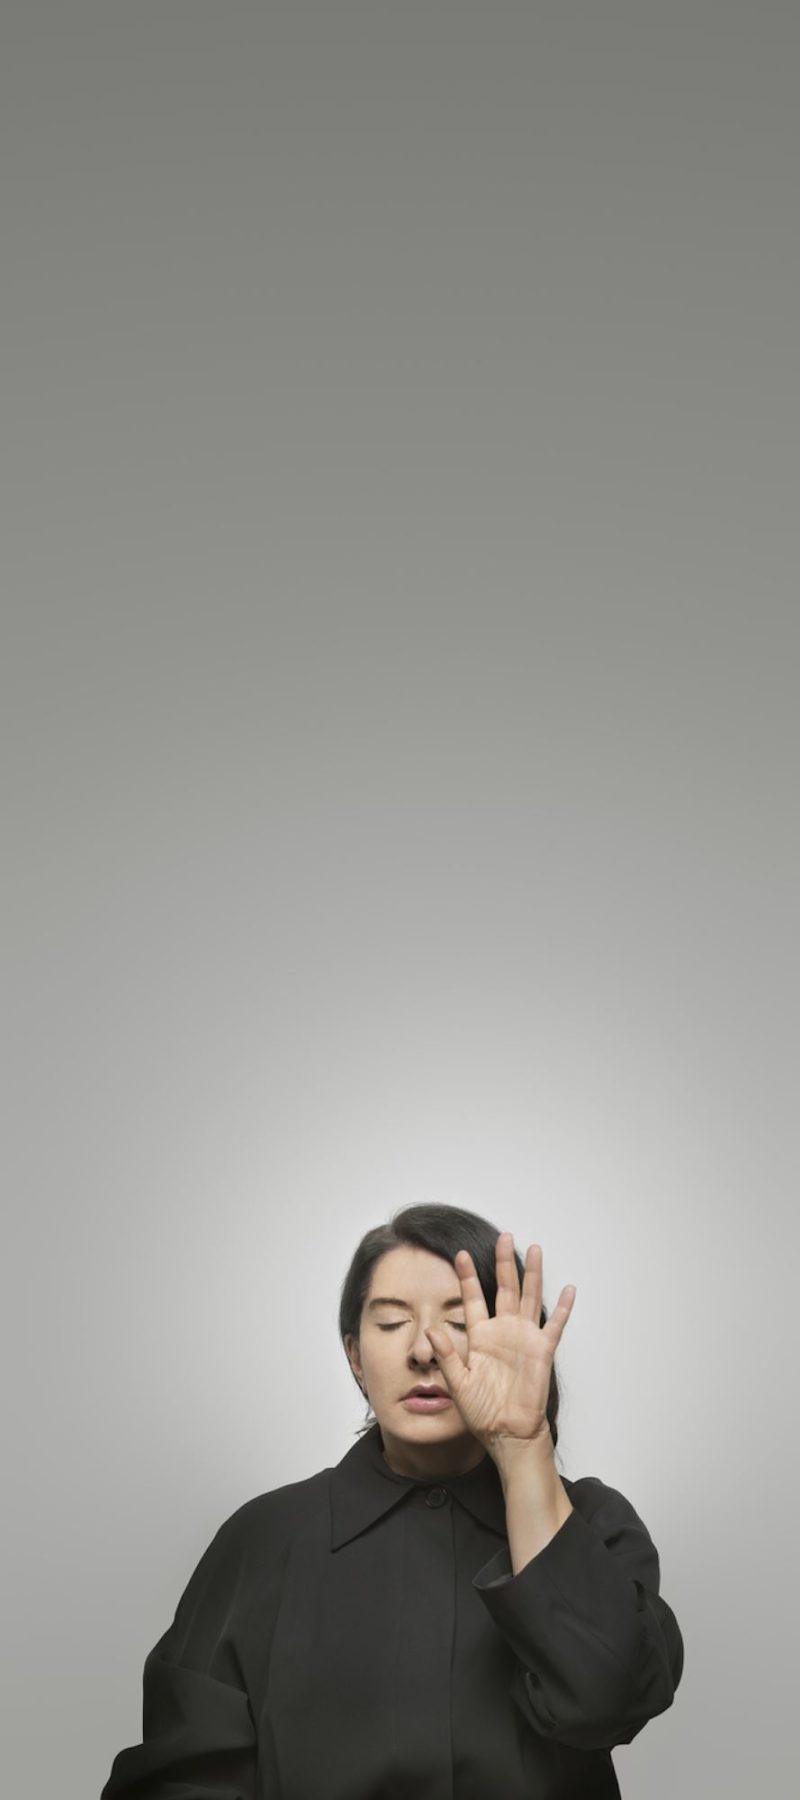 Marina Abramovic - Ecstasy II (A) (from the series With Eyes Closed I See Happiness), 2012, Fine art pigment print, 180 x 80 cm, 70 7/8 x 31 1/2 in, Galerie Krinzinger